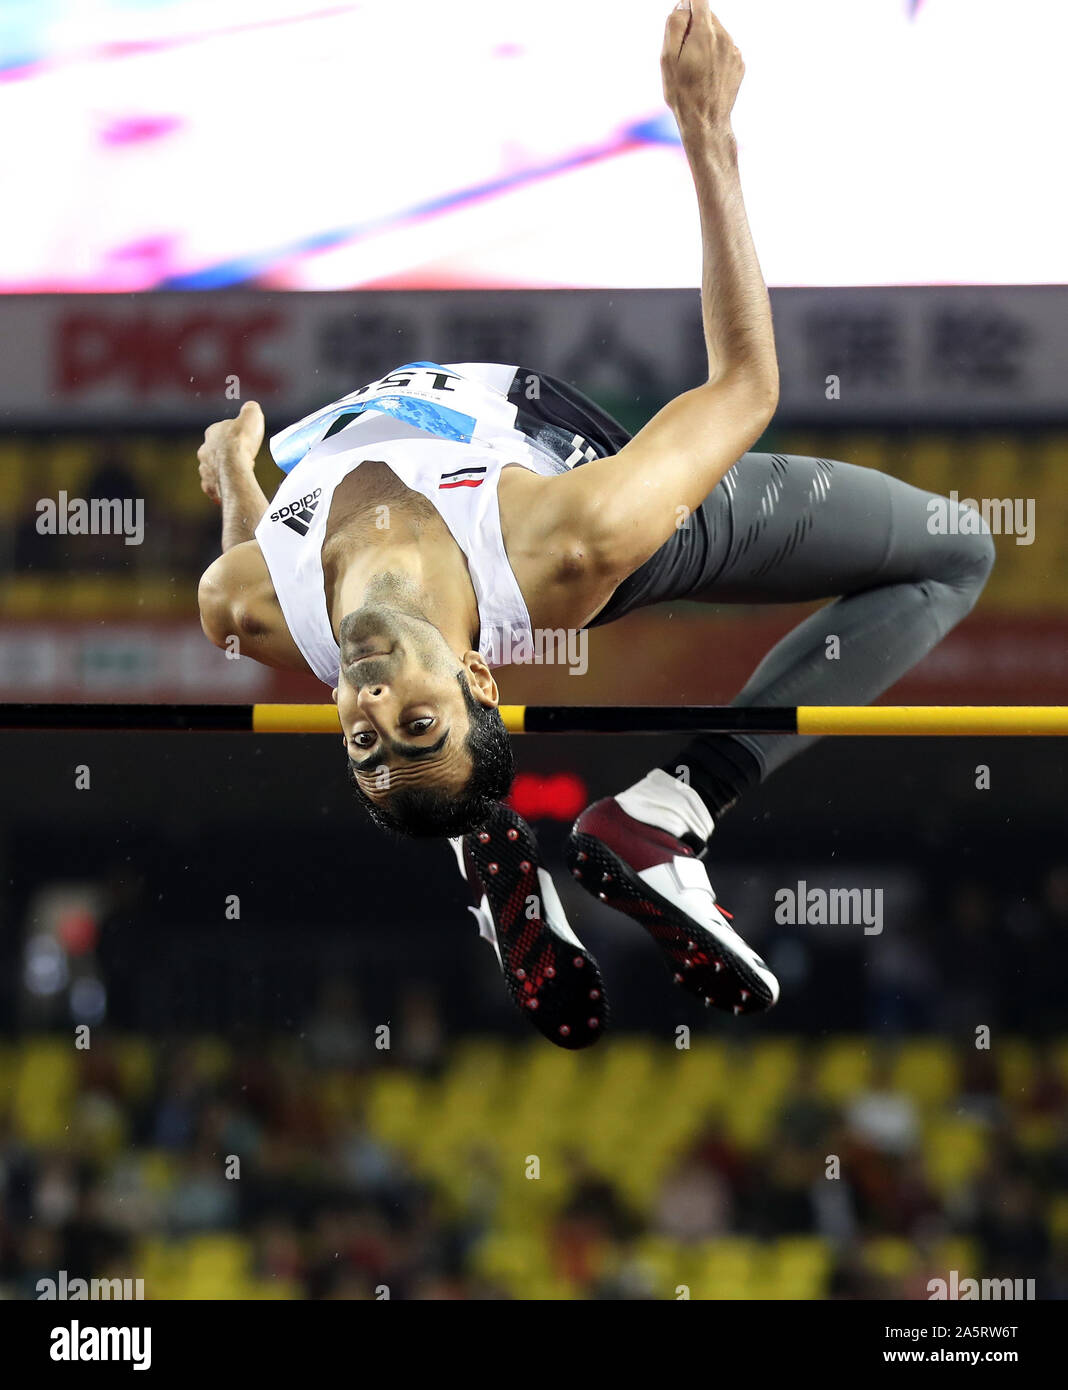 Wuhan, China's Hubei Province. 22nd Oct, 2019. Majed Aldin Gazal of Syria competes during the men's high jump of track and field at the 7th CISM Military World Games in Wuhan, capital of central China's Hubei Province, Oct. 22, 2019. Credit: Wang Lili/Xinhua/Alamy Live News Stock Photo